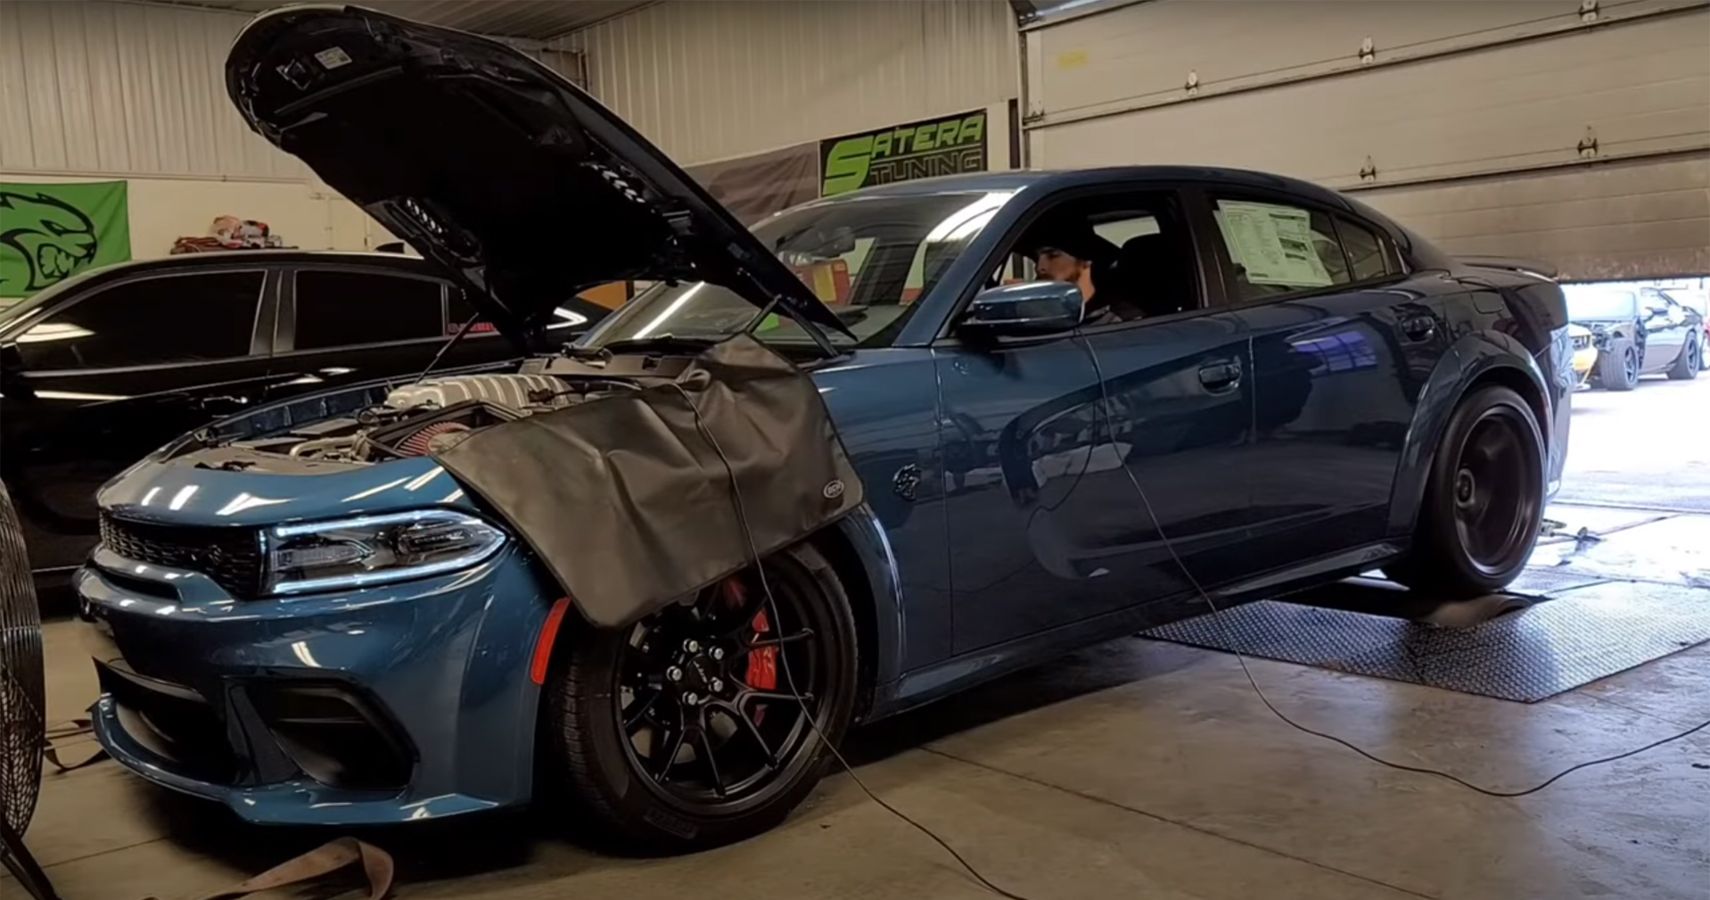 Dodge Charger Redeye being tested at Satera Tuning